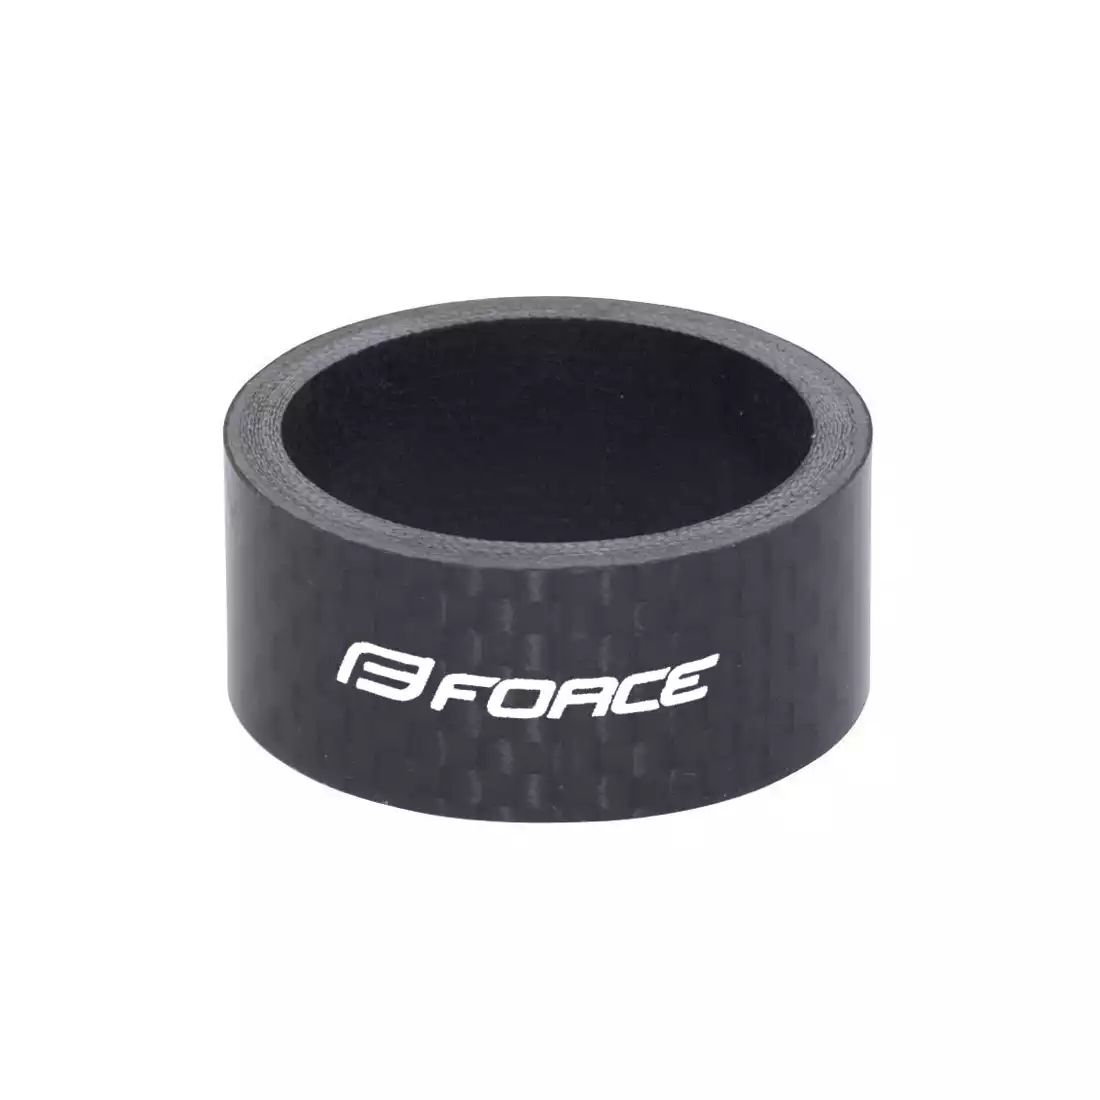 FORCE AHEAD CARBON Pad for bicycle rudders 1 1/8“, 15mm, black